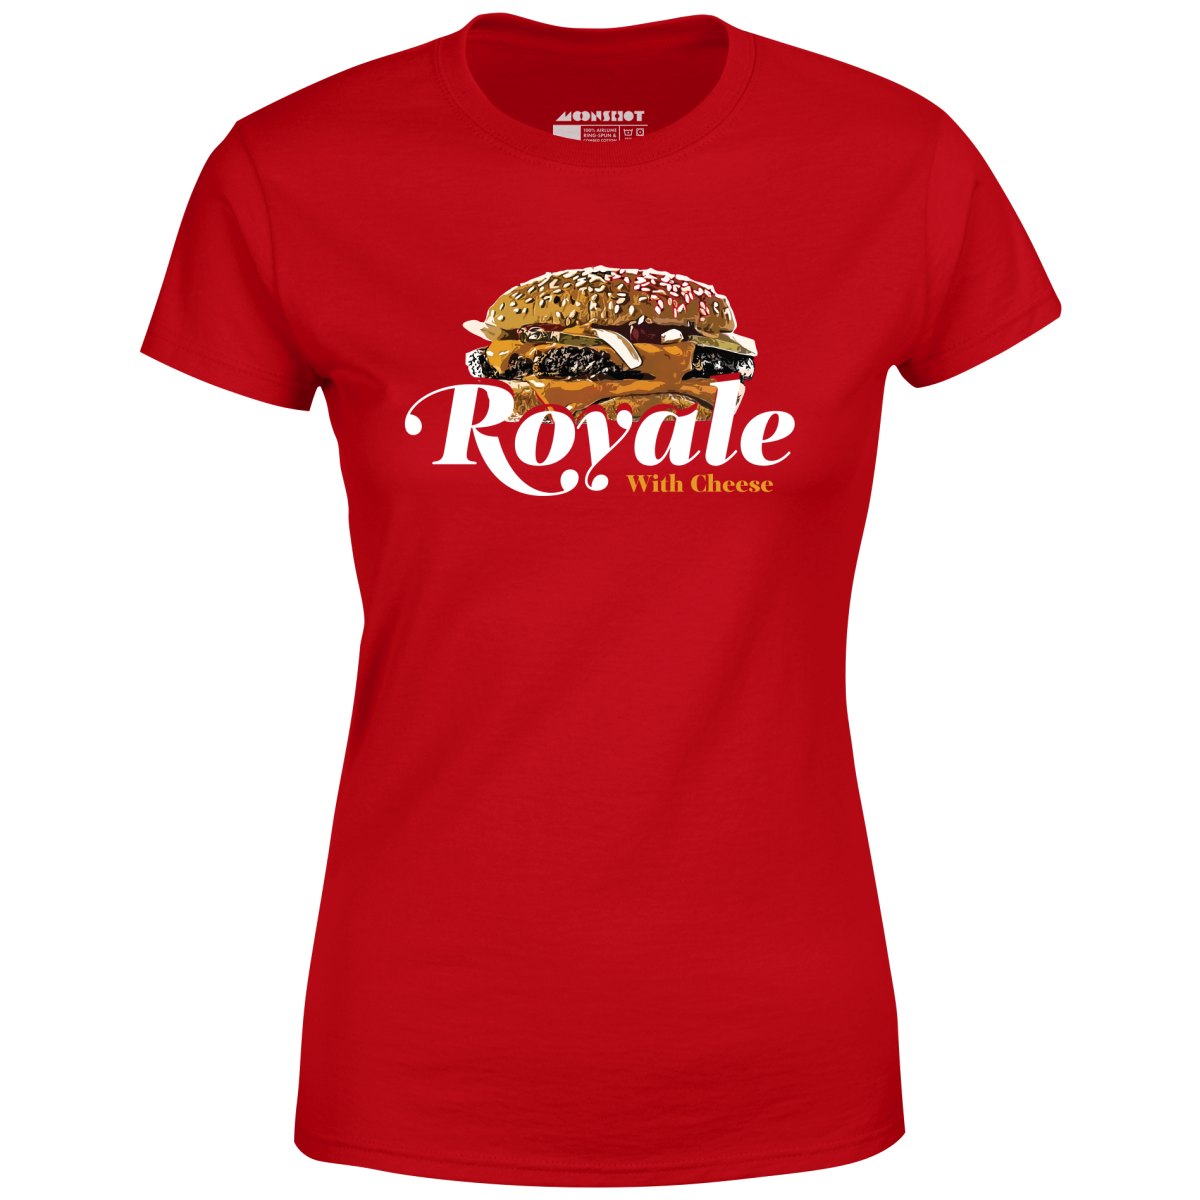 Royale With Cheese - Women's T-Shirt